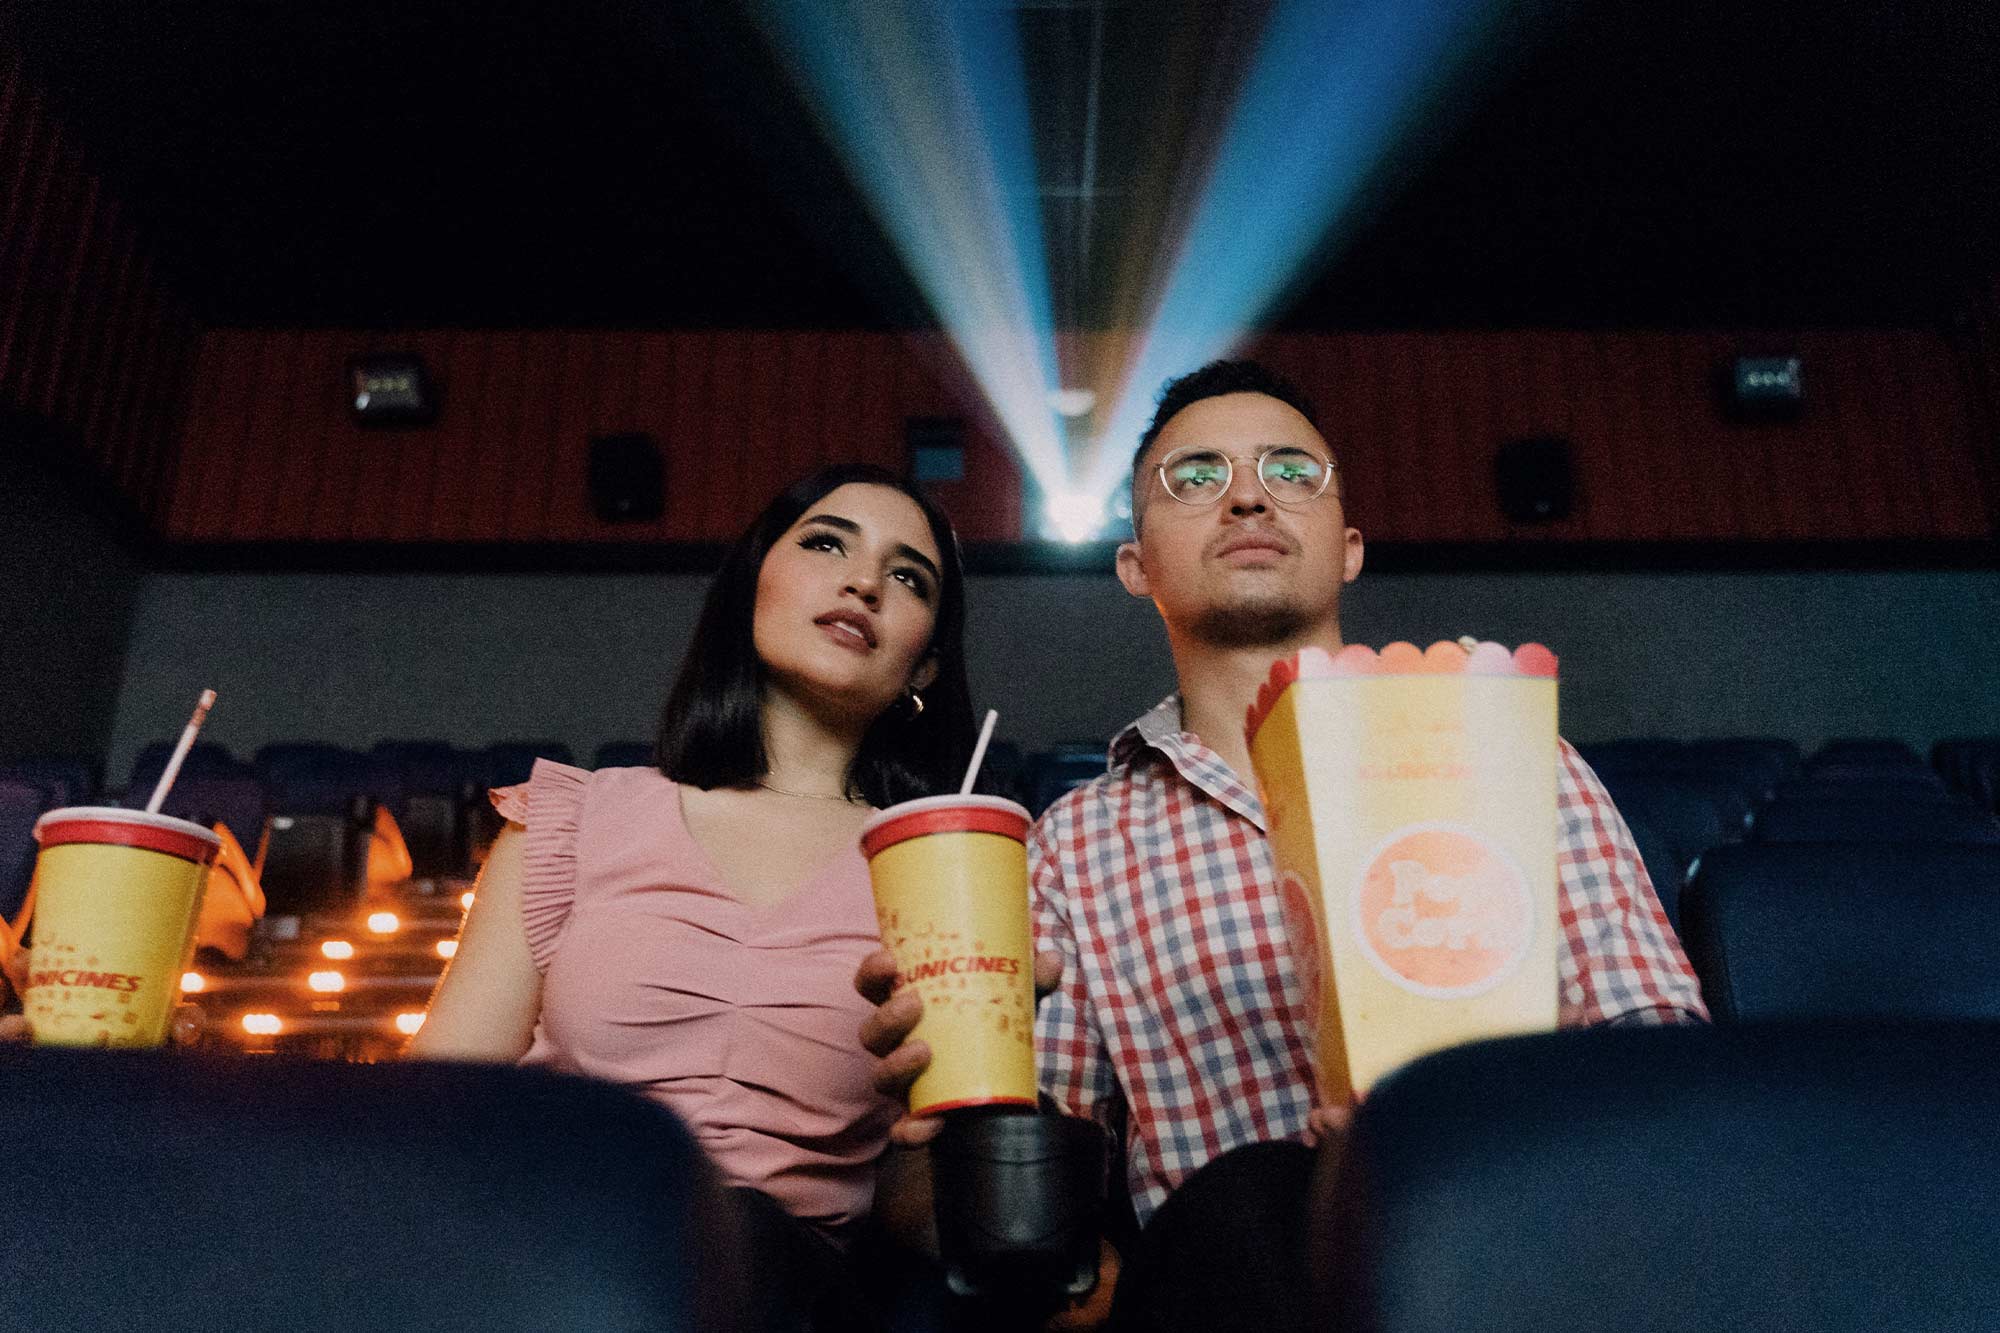 A man and woman sit side-by-side in a movie theatre, with popcorn and drinks